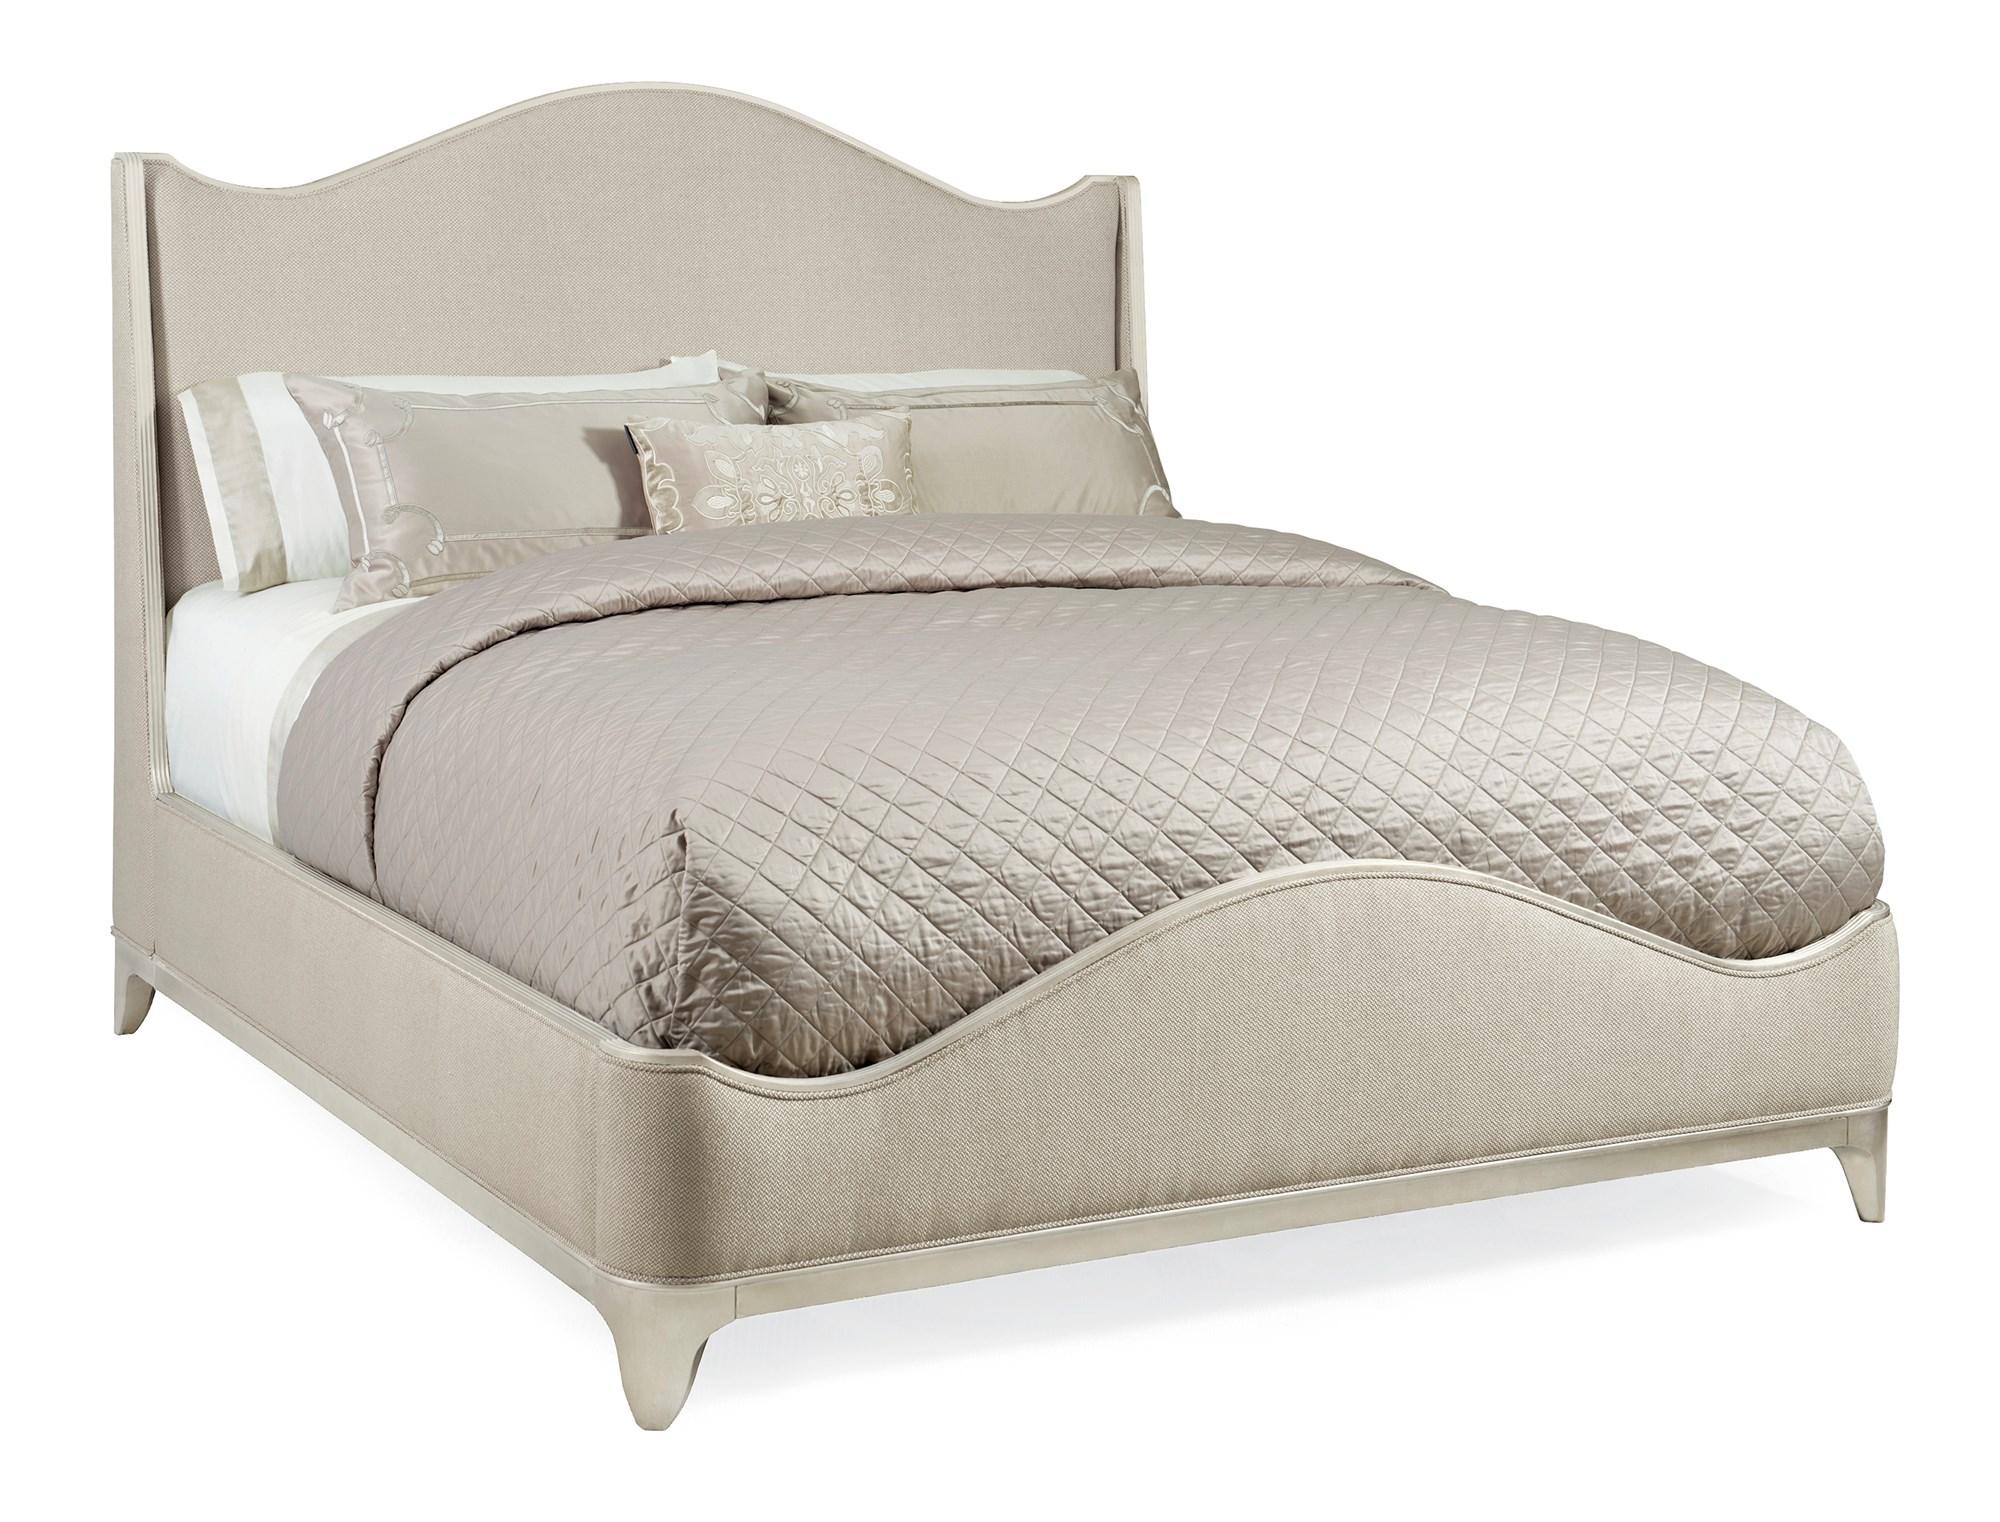 Contemporary Sleigh Bed AVONDALE CAL KING UPHOLSTERED BED C023-417-141 in Cream, Silver Fabric